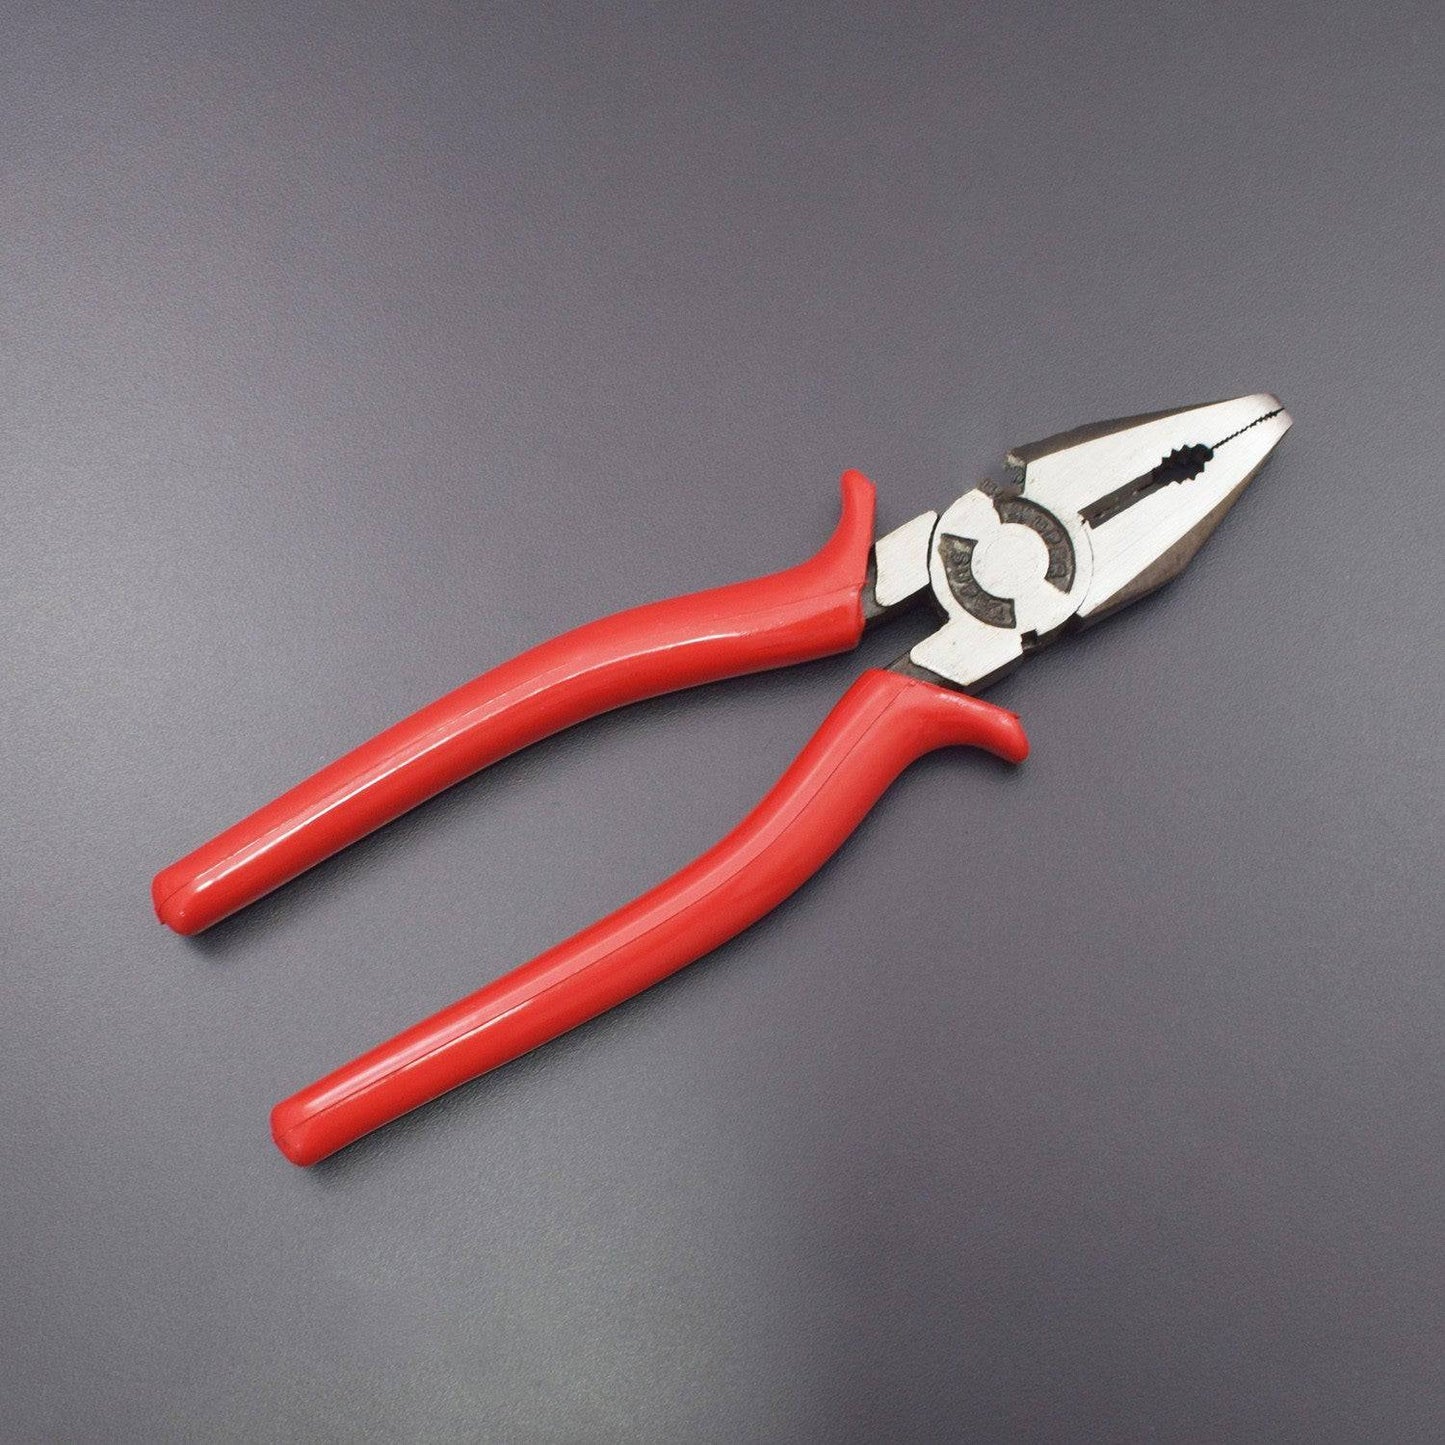 8" Insulated Combination Plier-General purpose - ER032 - REES52